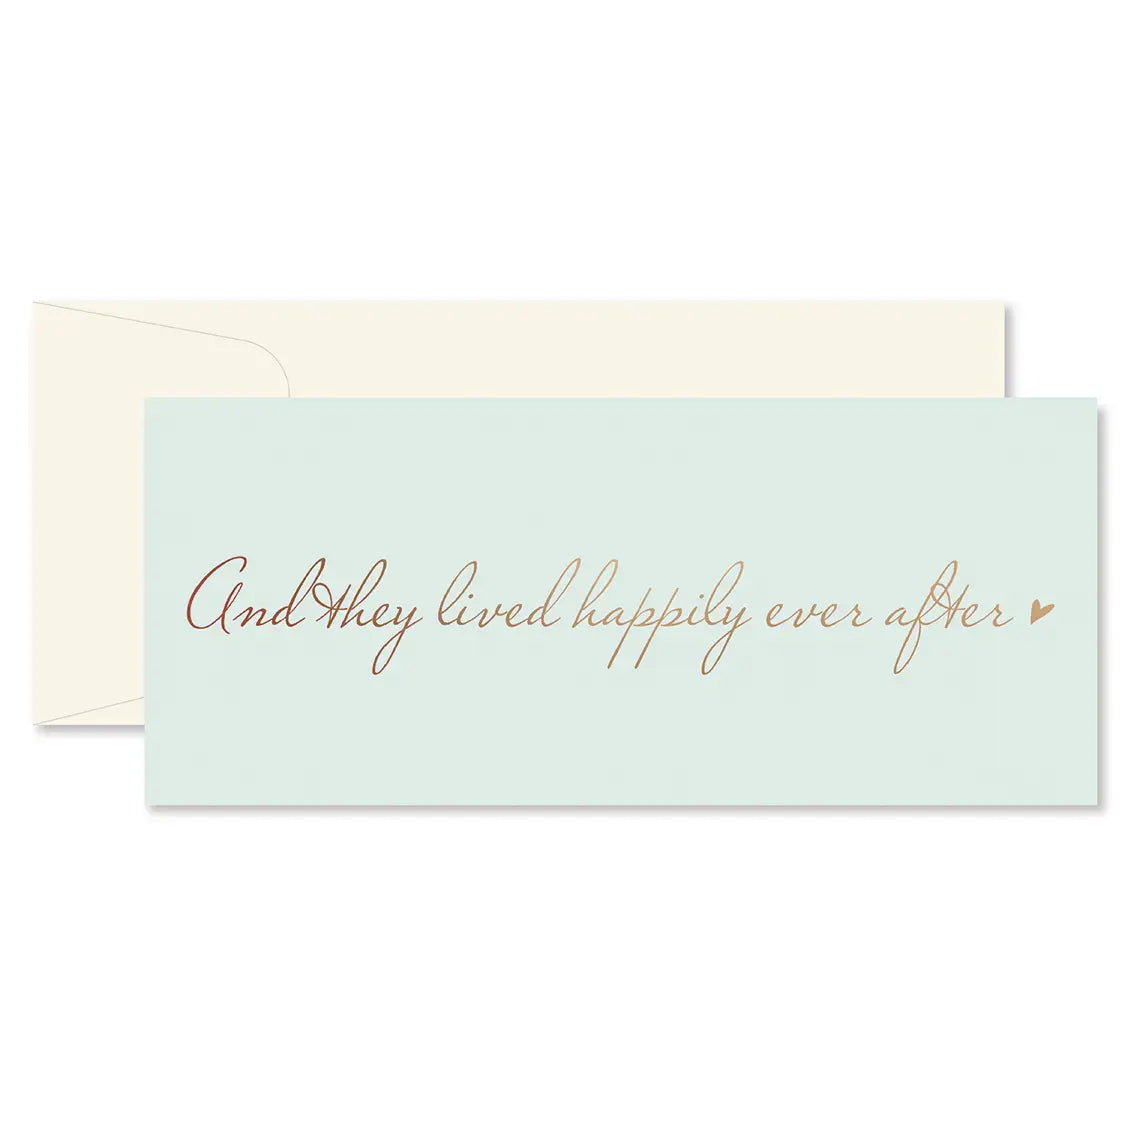 And they lived happy ever after card